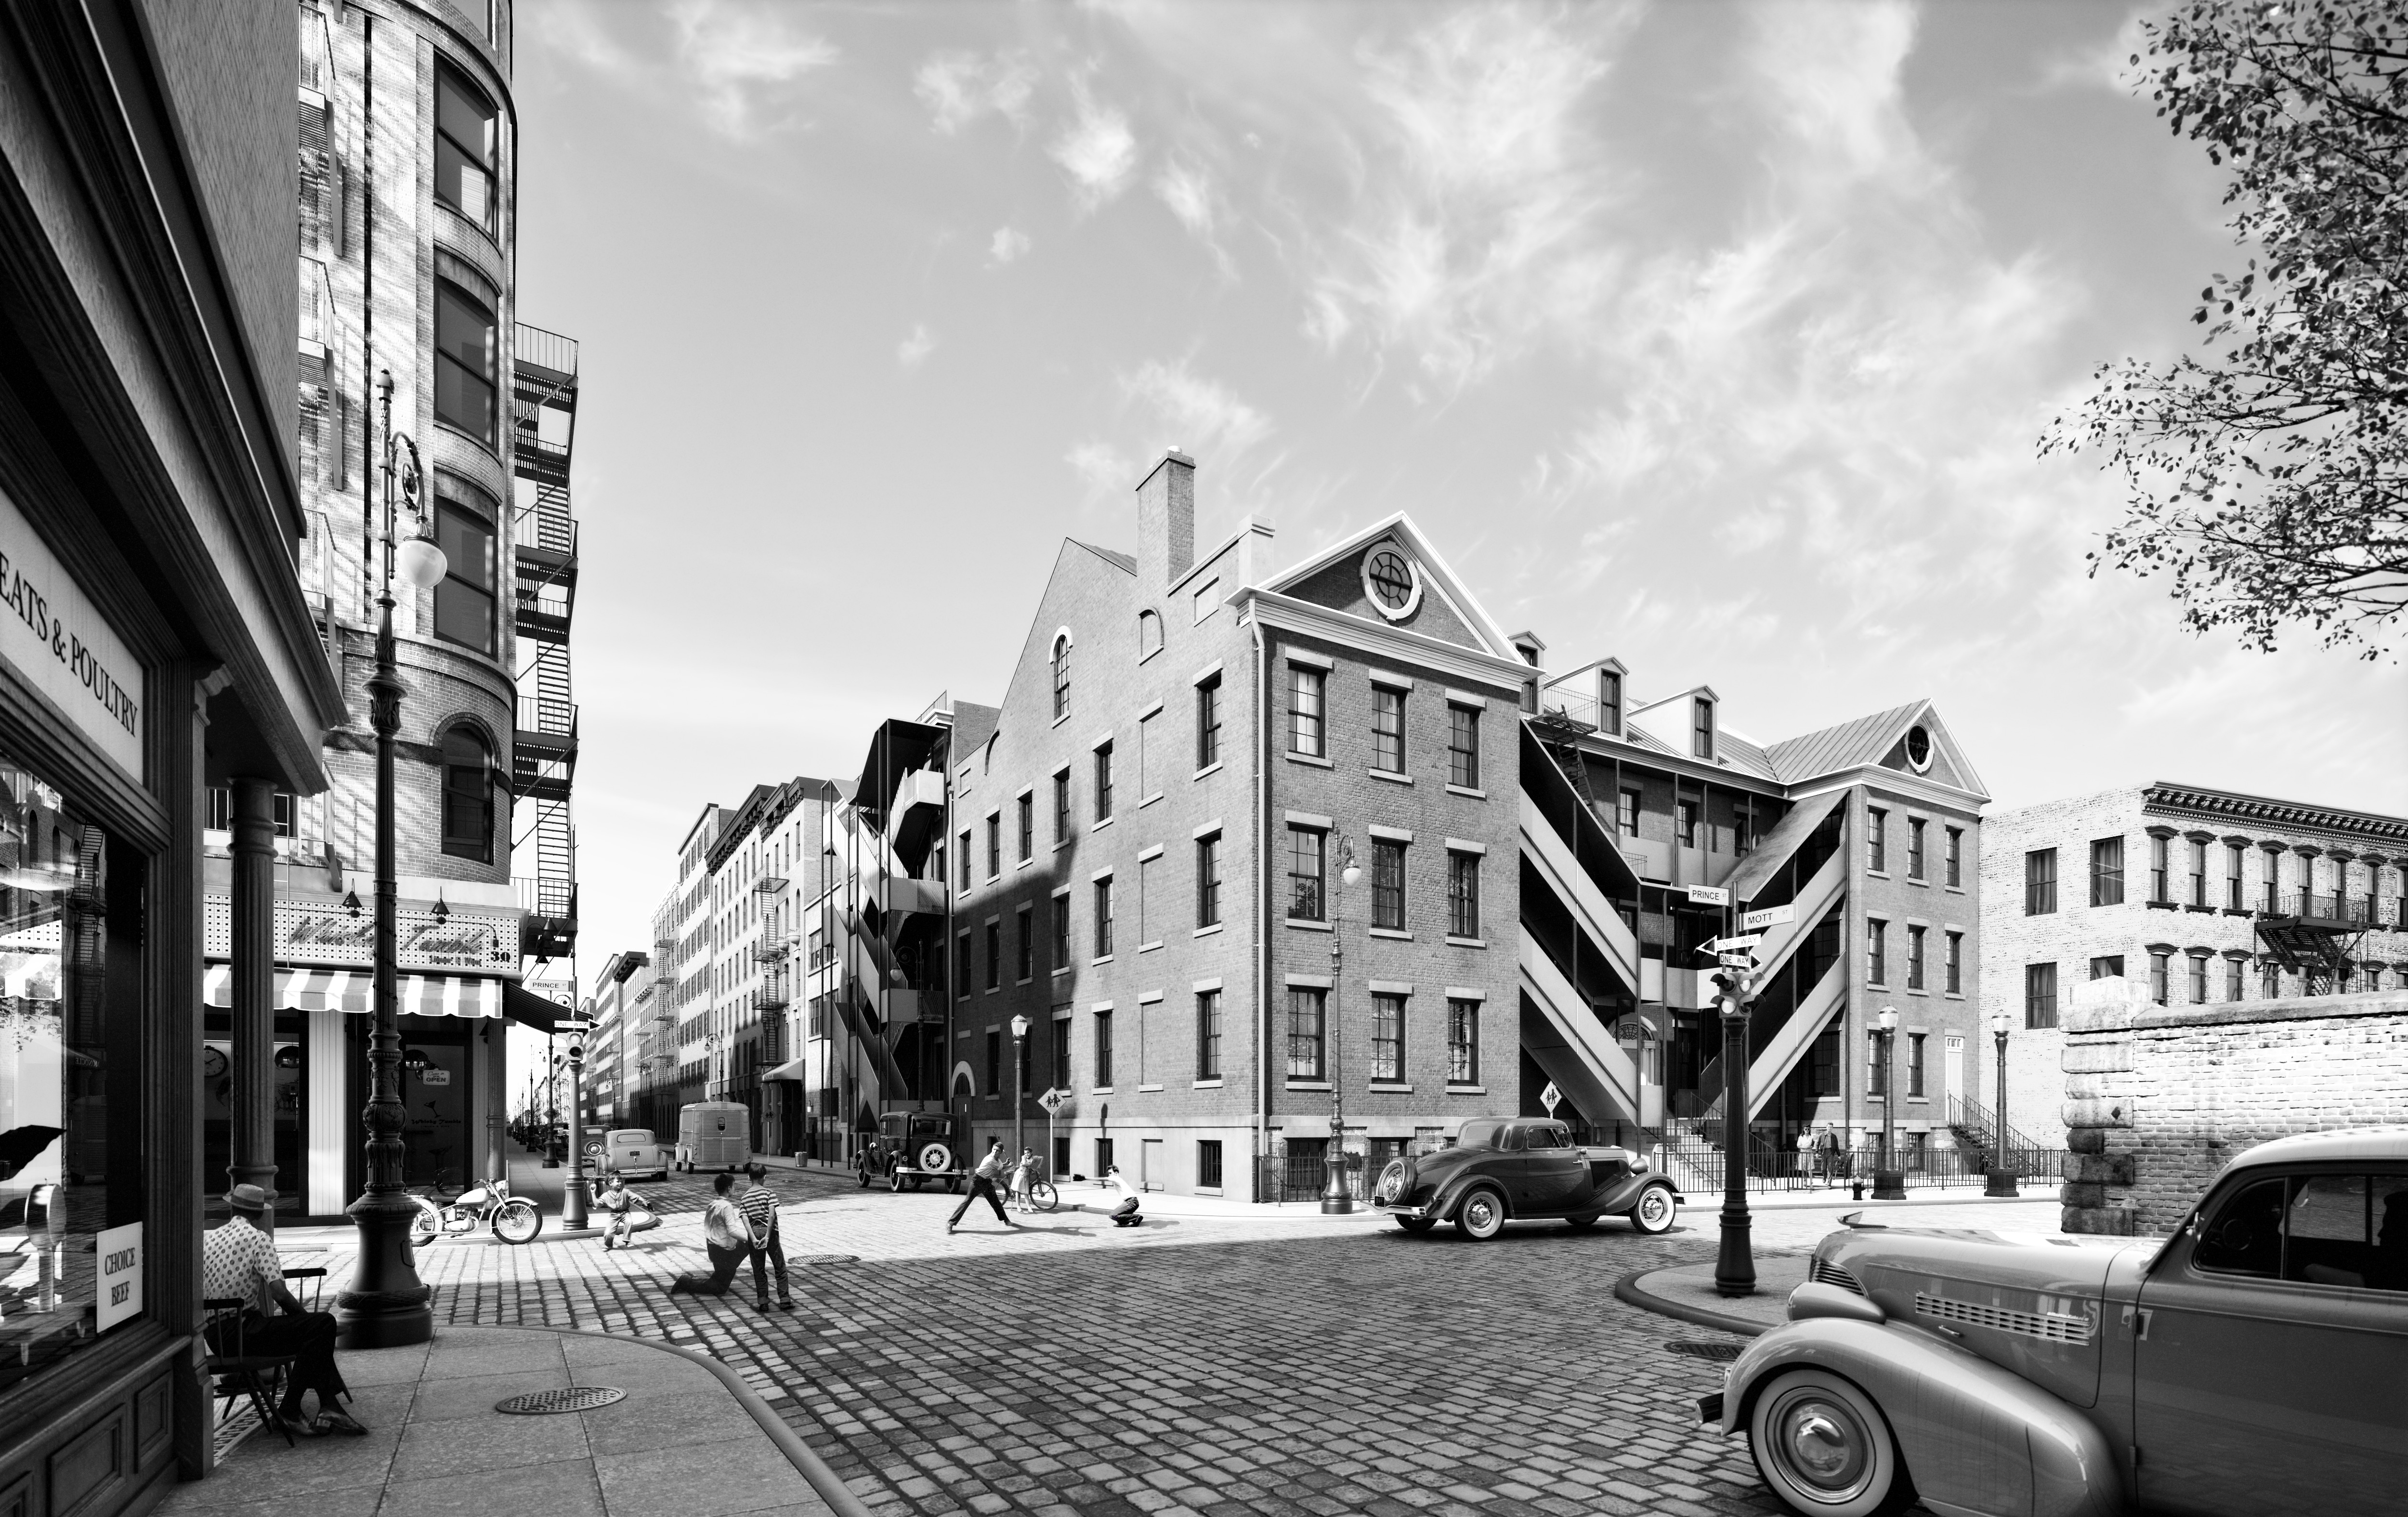 34 Prince Street in the 1940s, rendering by Marvel Architects